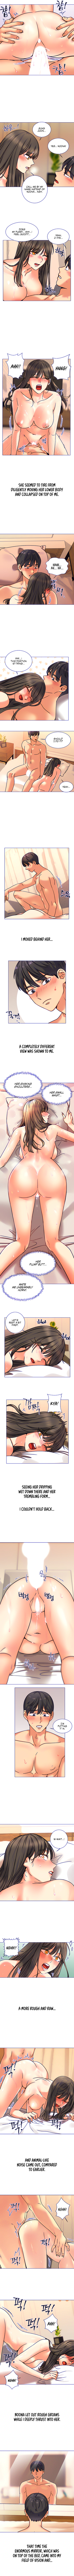 My girlfriend is so naughty Chapter 3 - Page 3